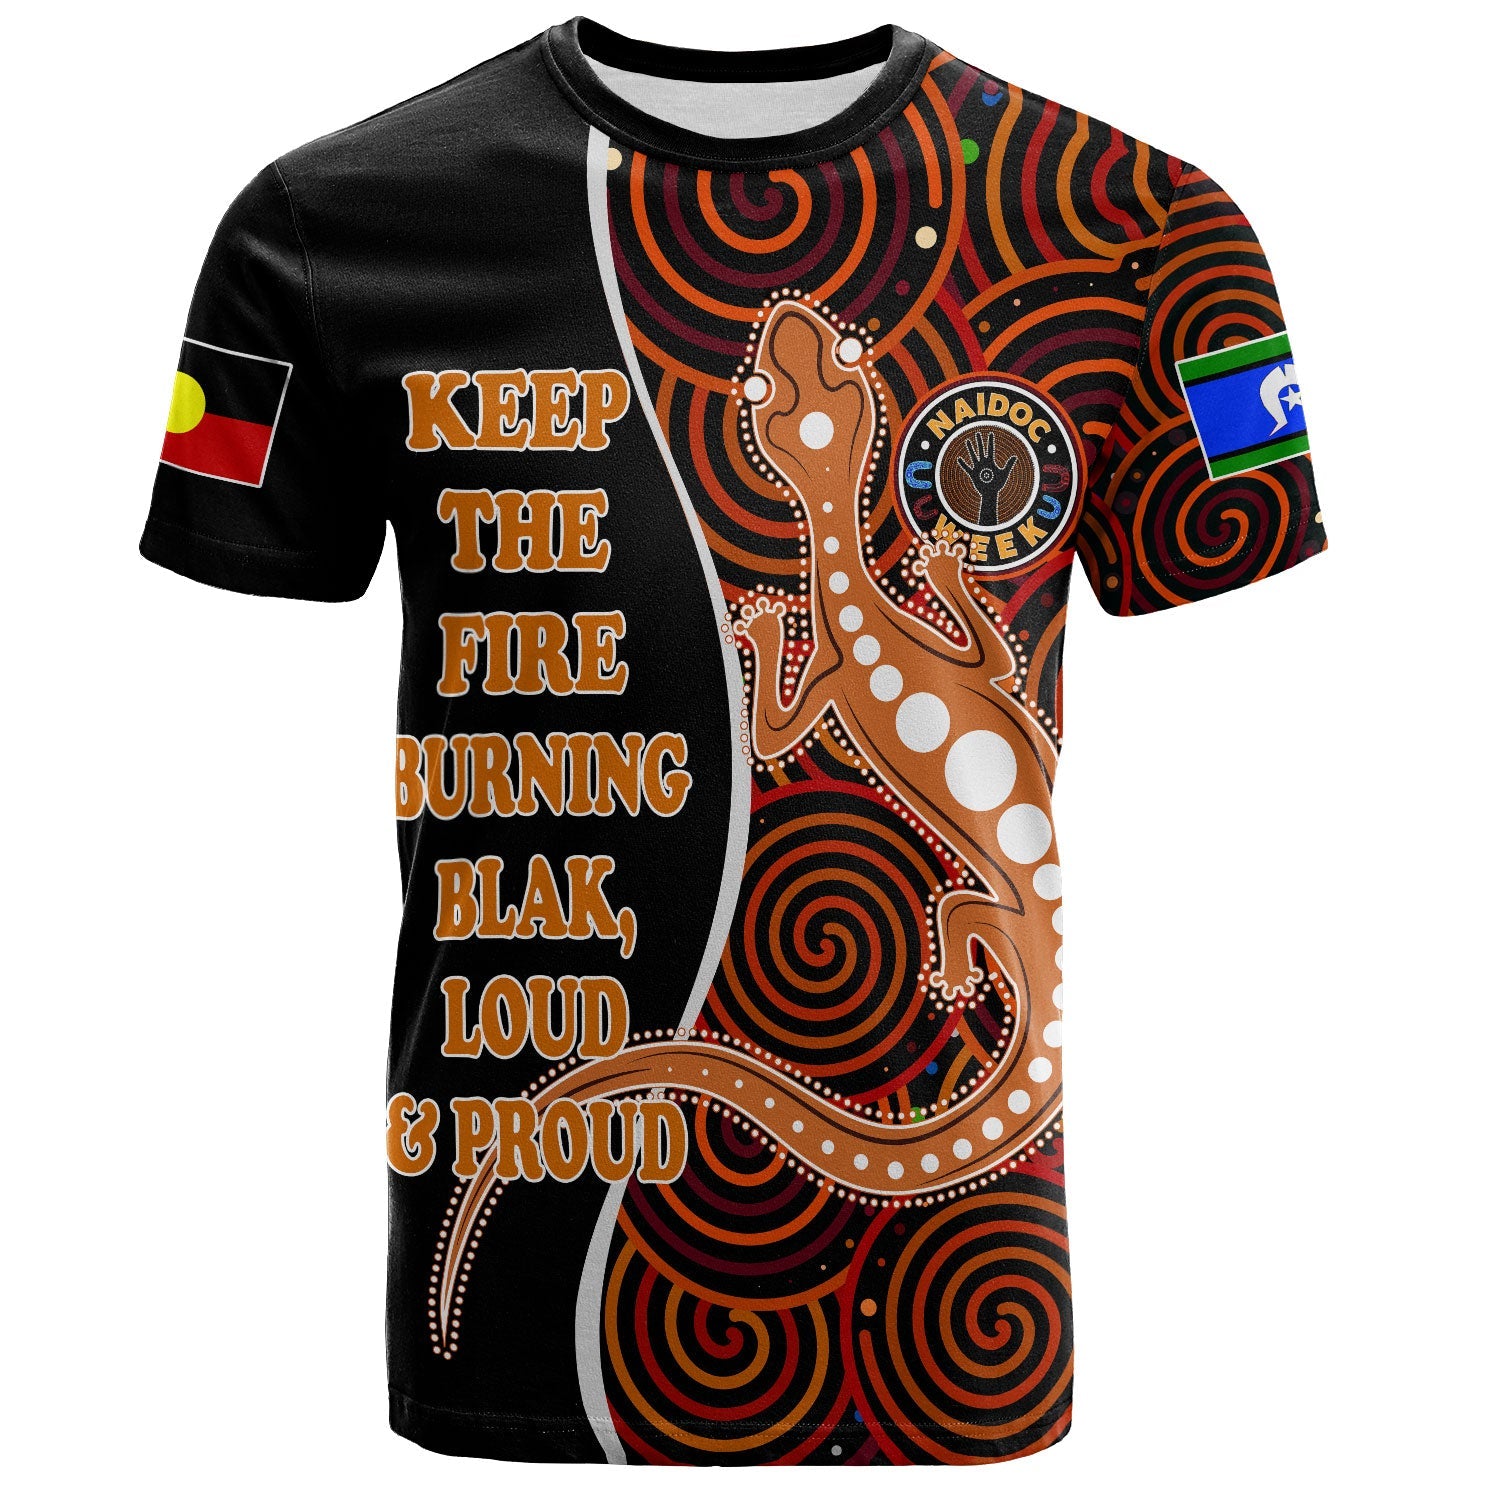 Australia Naidoc Week 2024 T-Shirt Keep The Fire Burning Those Who Lose Dreaming Are Lost T-Shirt